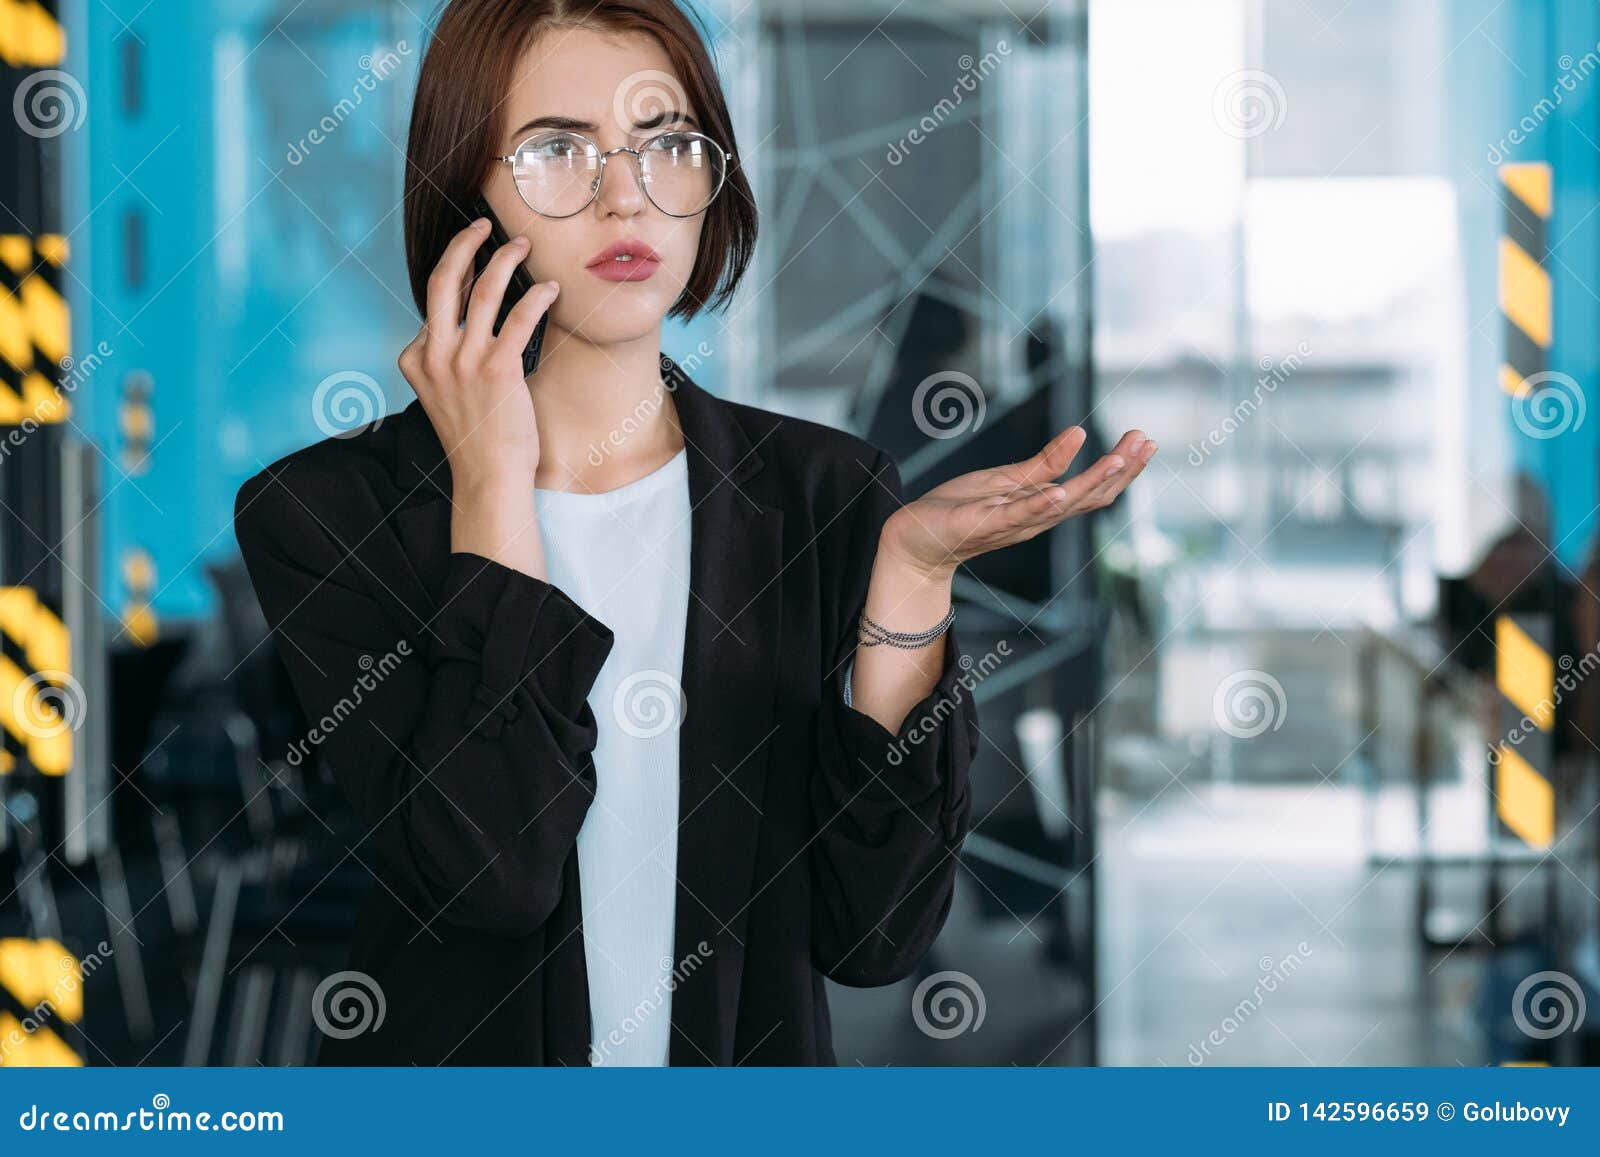 Business Conversation Troubleshooting Worker Phone Stock Image - Image ...